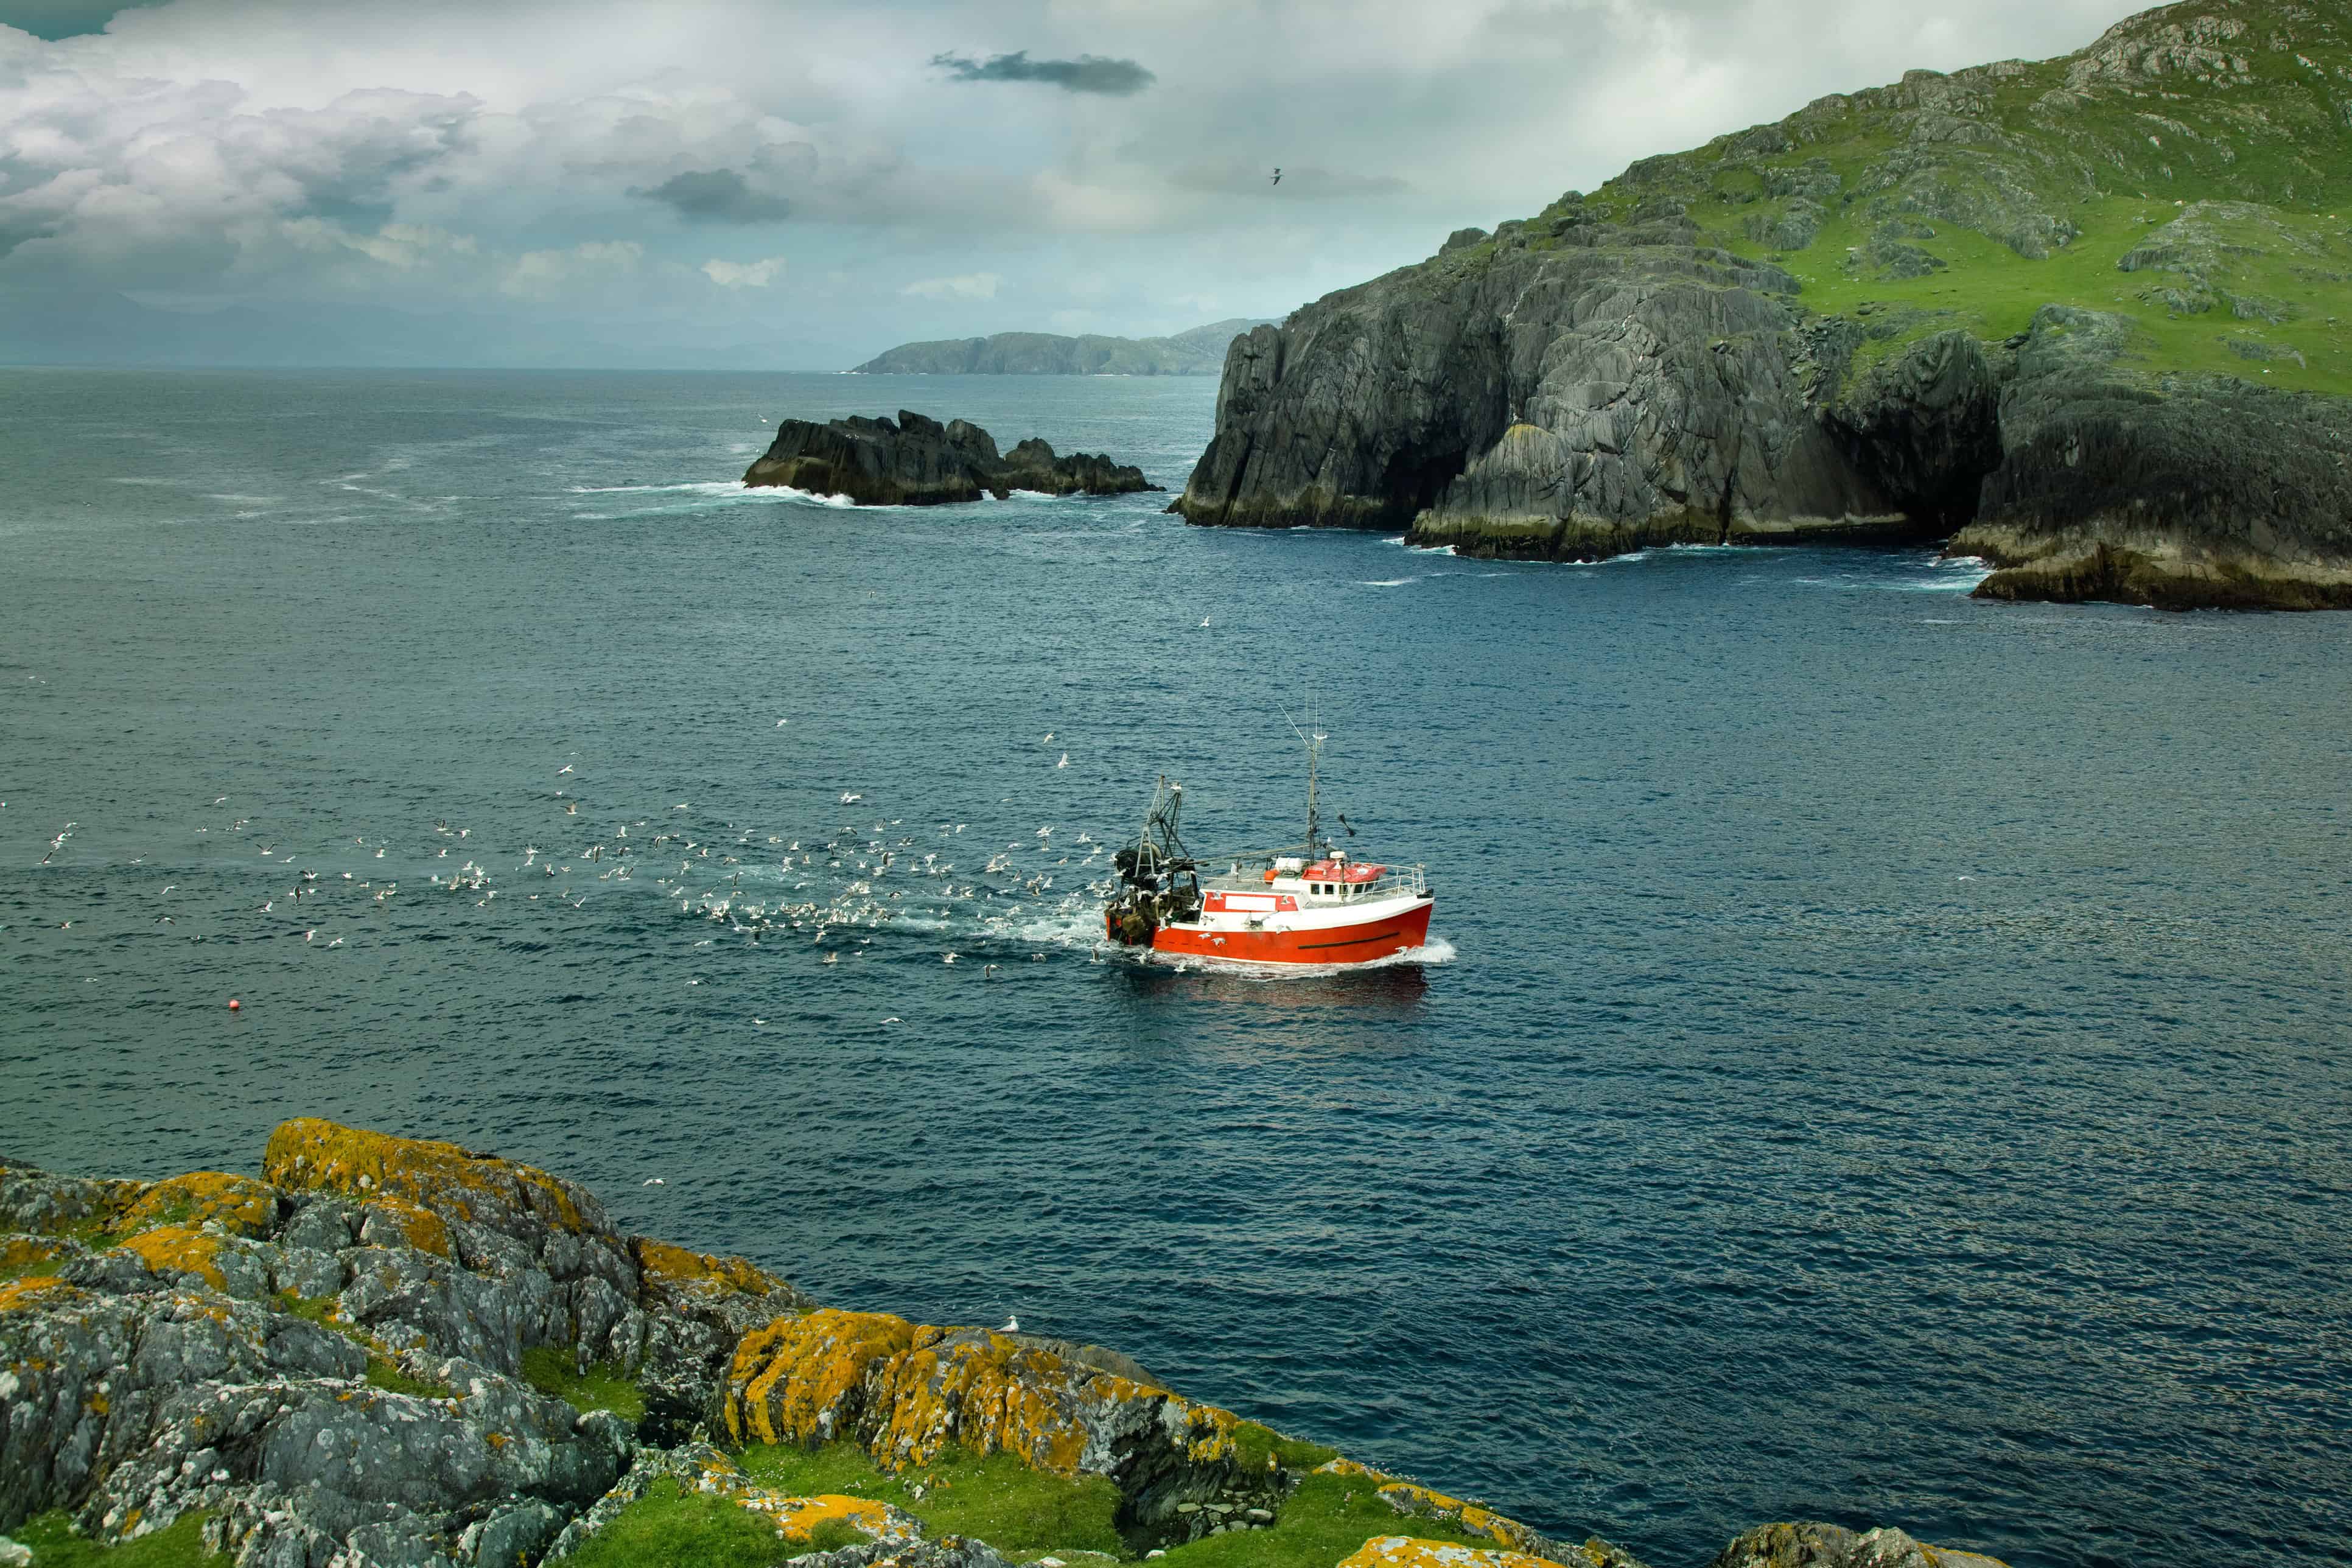 fishing boat returning home before sea storm. Southwest Ireland. Note to inspector: photo is stitched.